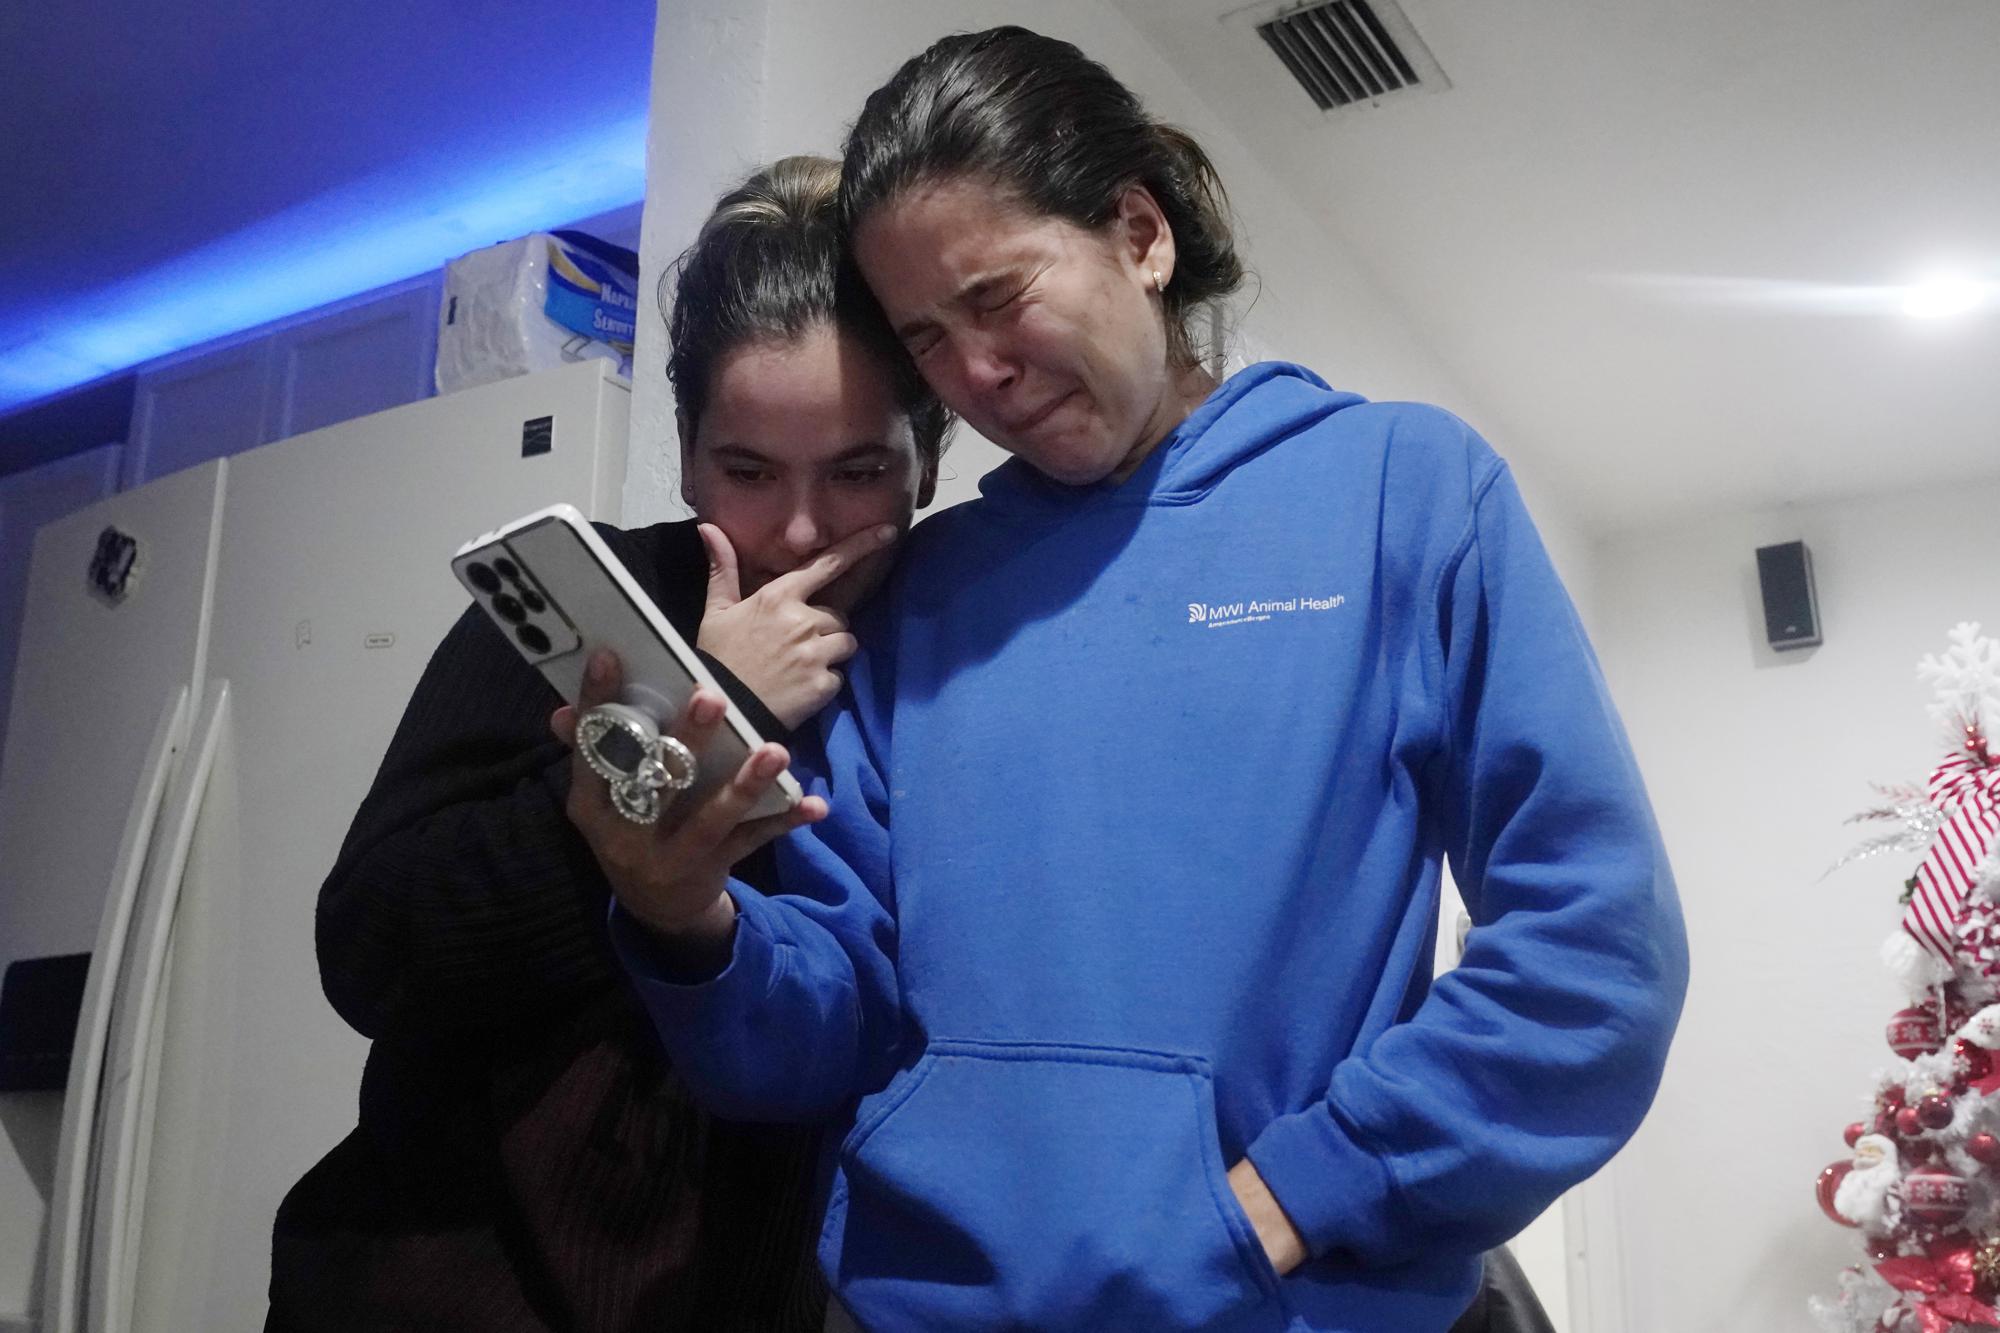 Melanie Rolo Gonzalez, right, and her sister Merlyn hold a video call with their mother and grandfather back home in Cuba, from the home of a family friend in Daytona, Florida, Tuesday, Jan. 3, 2023. On New Year's Eve, the sisters waded through the Rio Grande into the U.S., where they were immediately met by Border Patrol agents, detained and quickly released under 60 days parole. (AP Photo/Marta Lavandier)